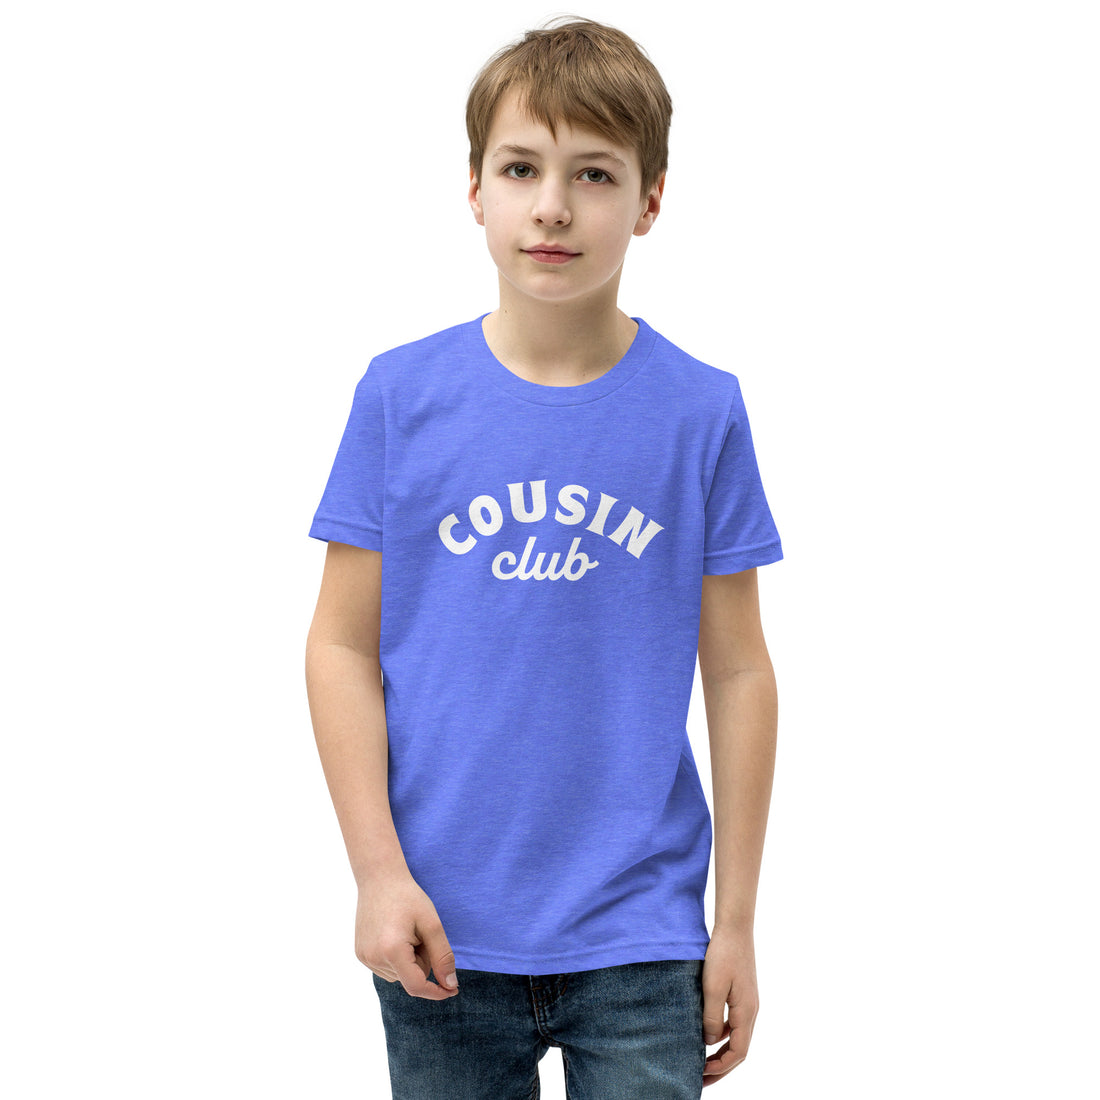 Cousin Club Youth Tee